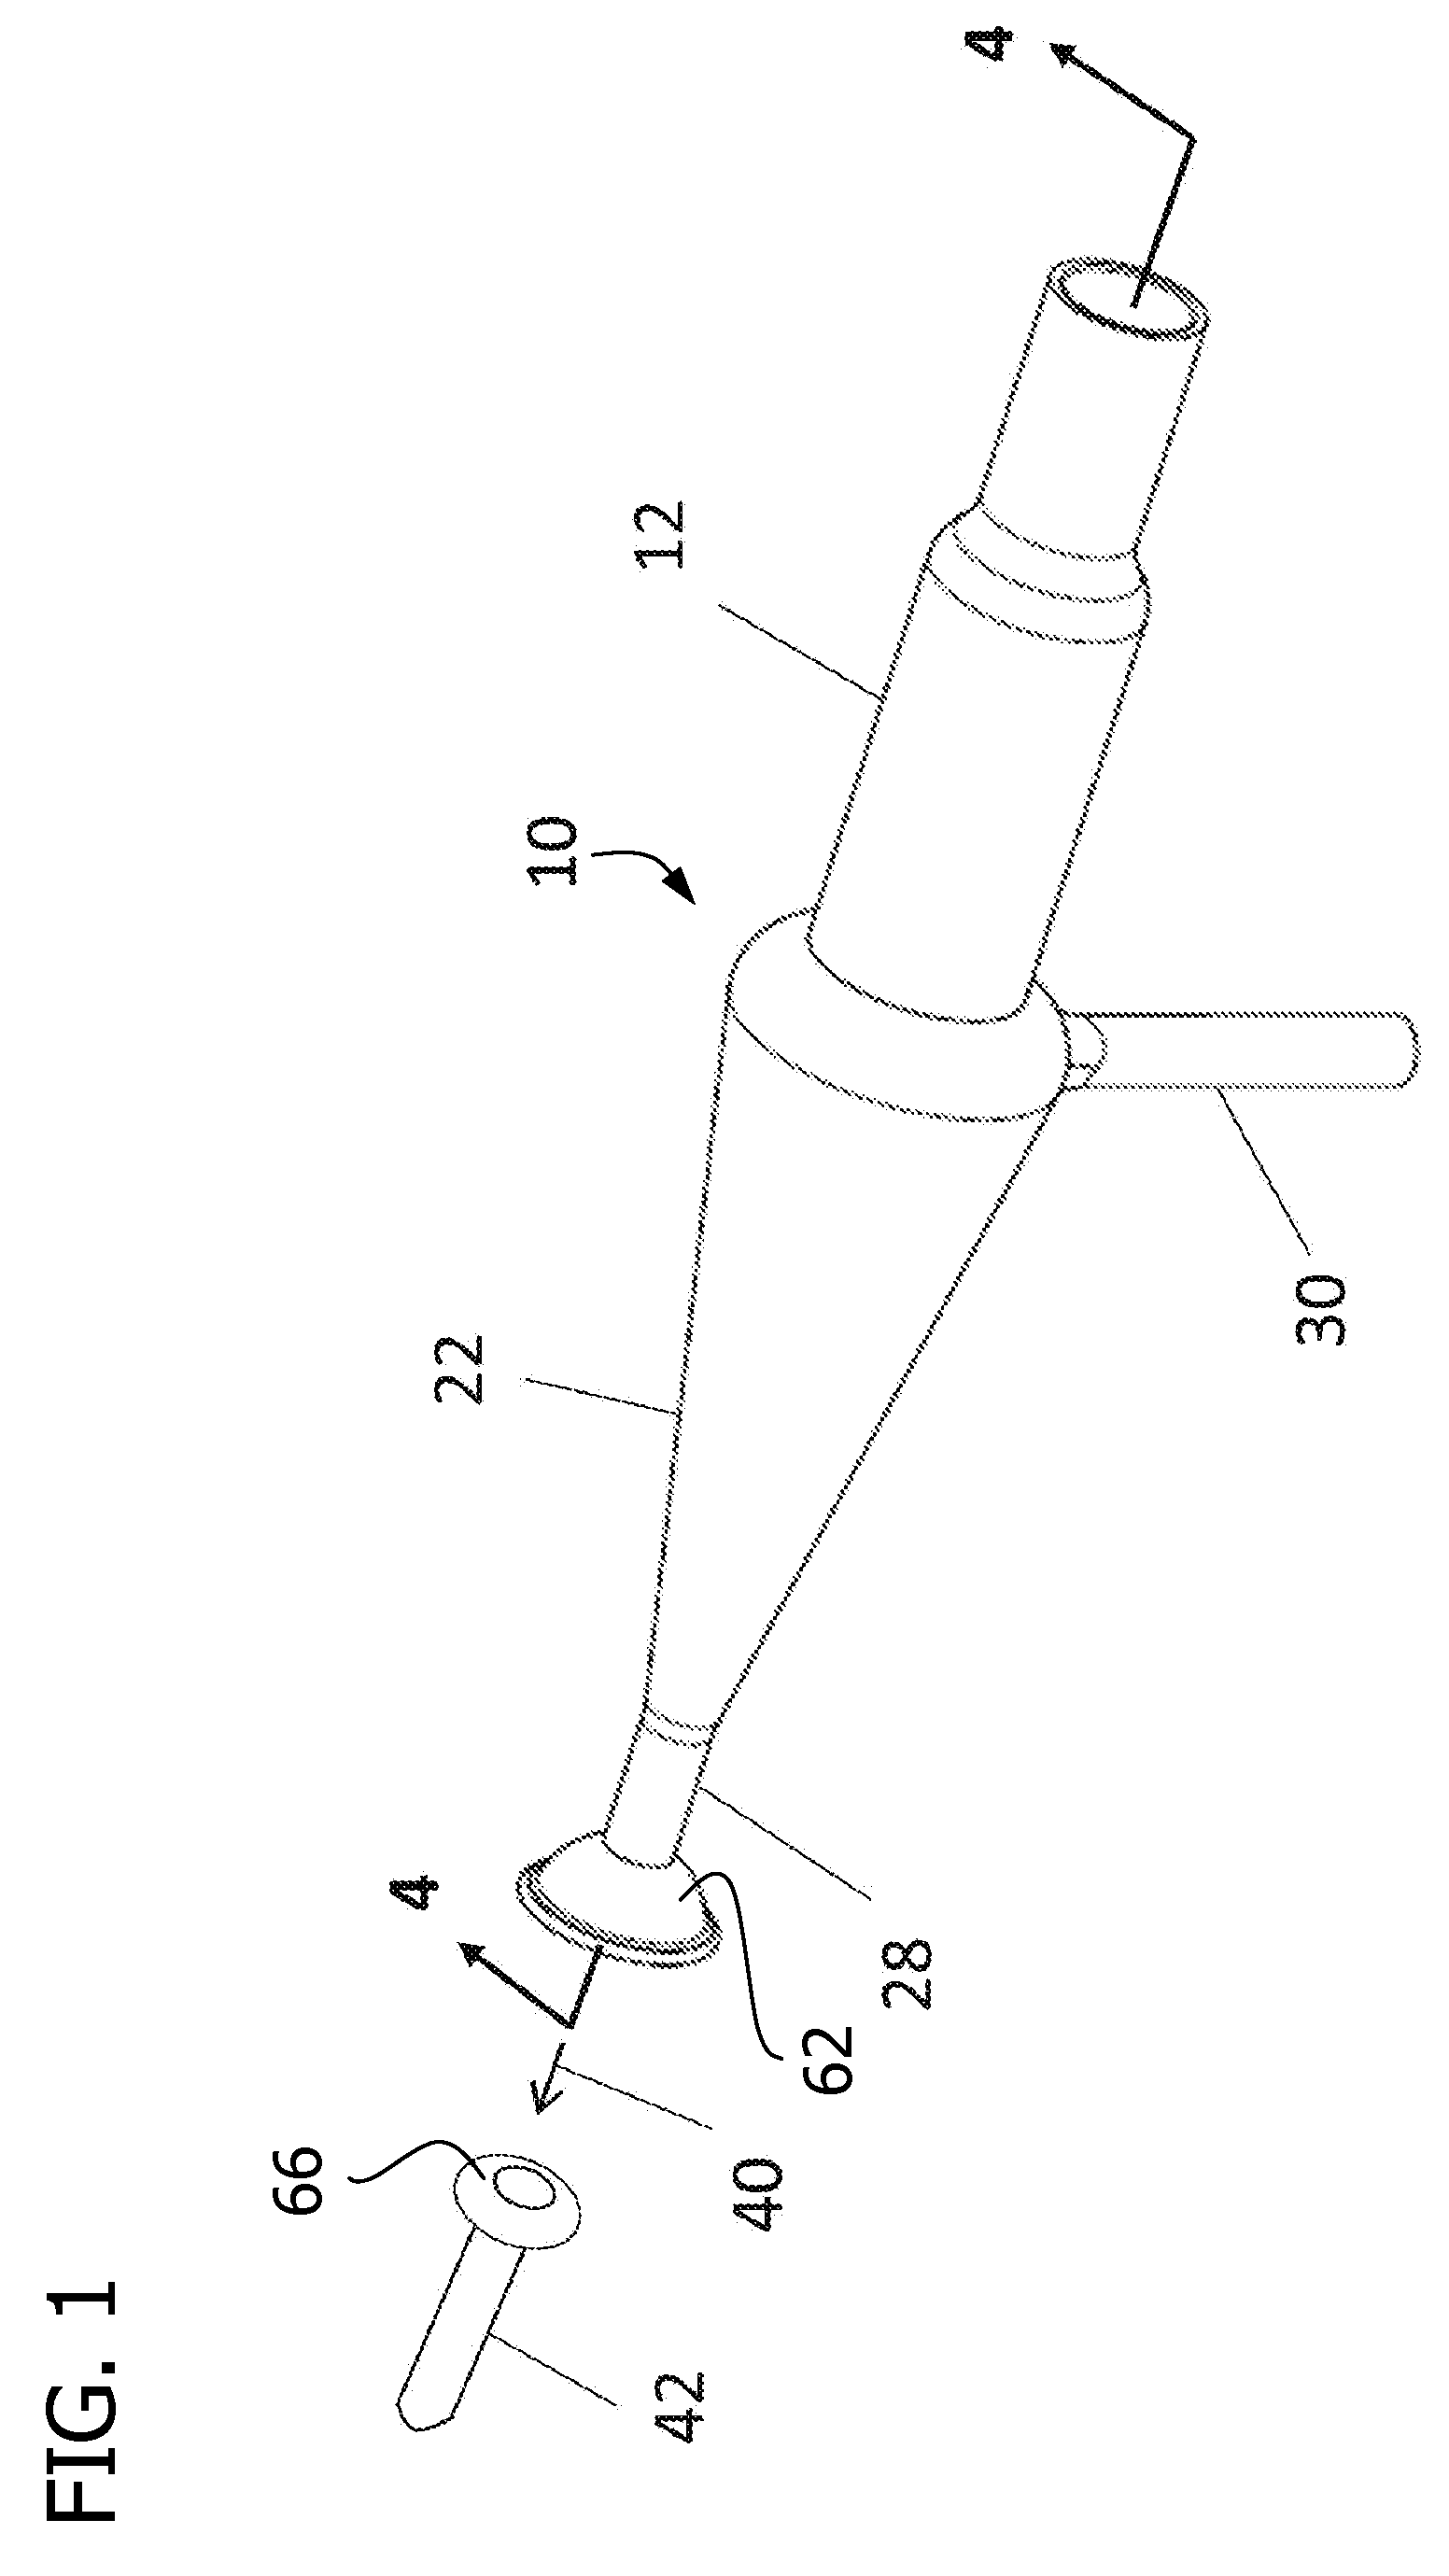 Sample transferring apparatus for mass cytometry